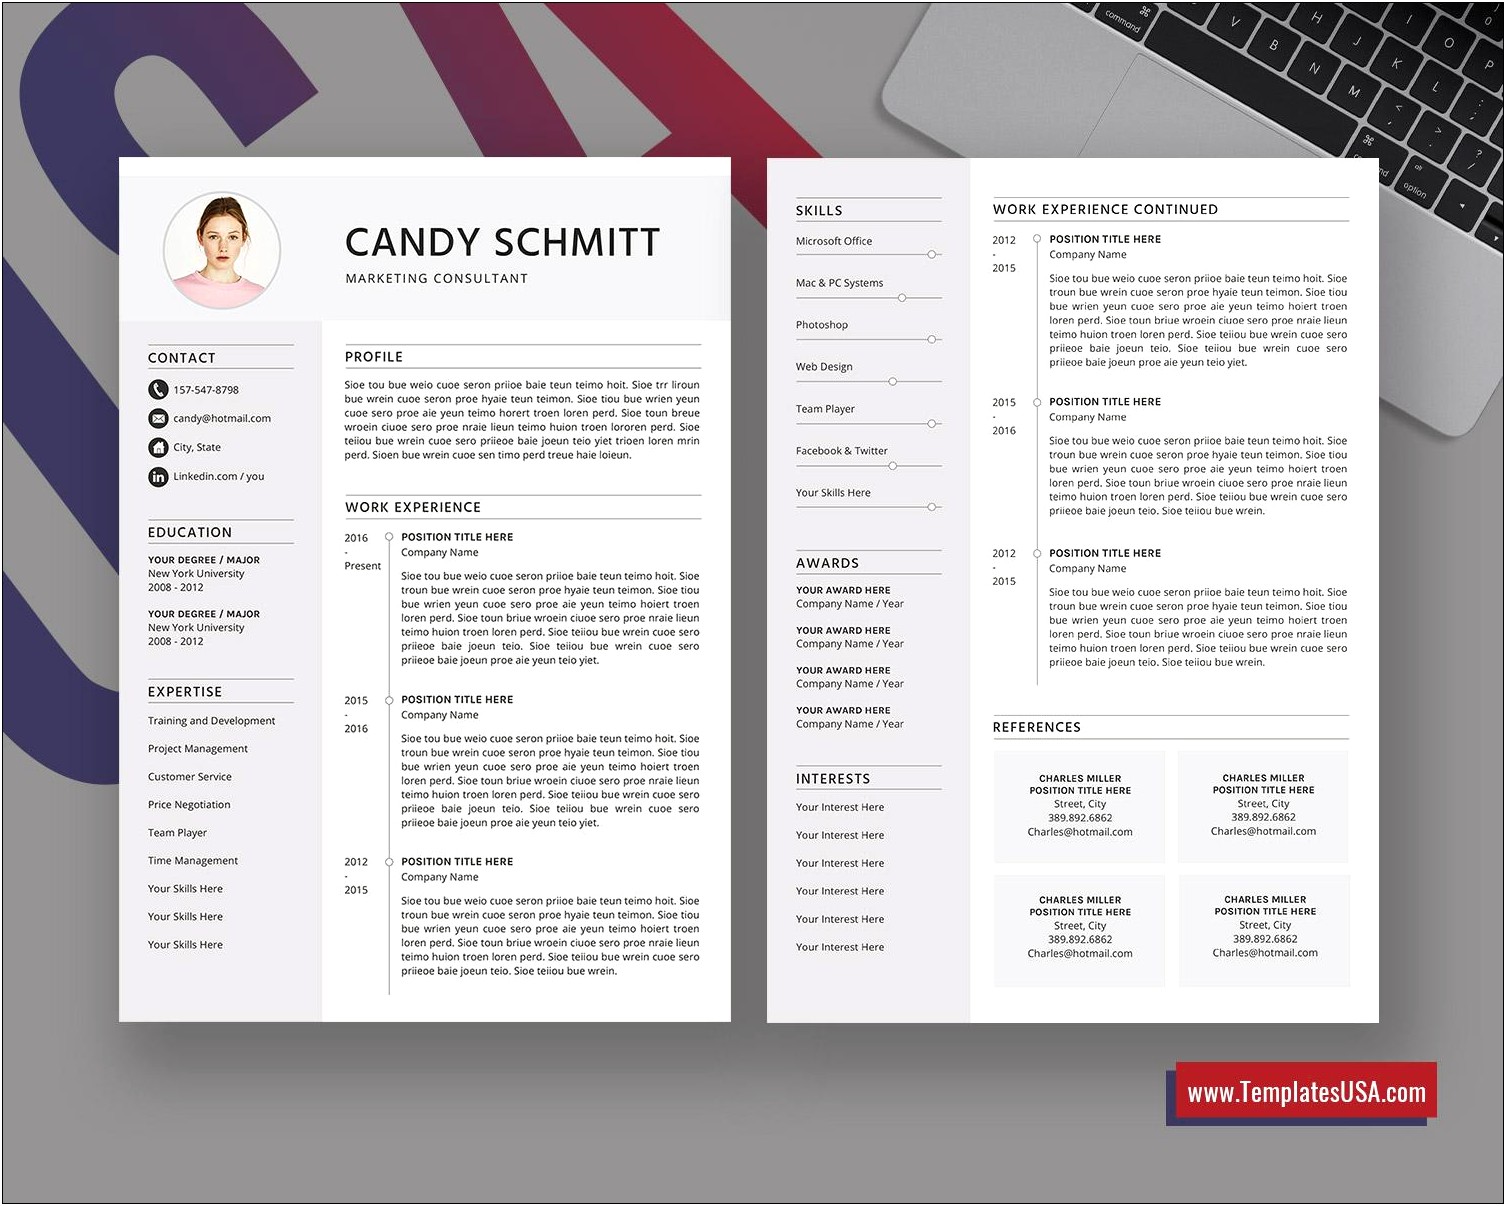 Resume Word 2013 Template Filled Out